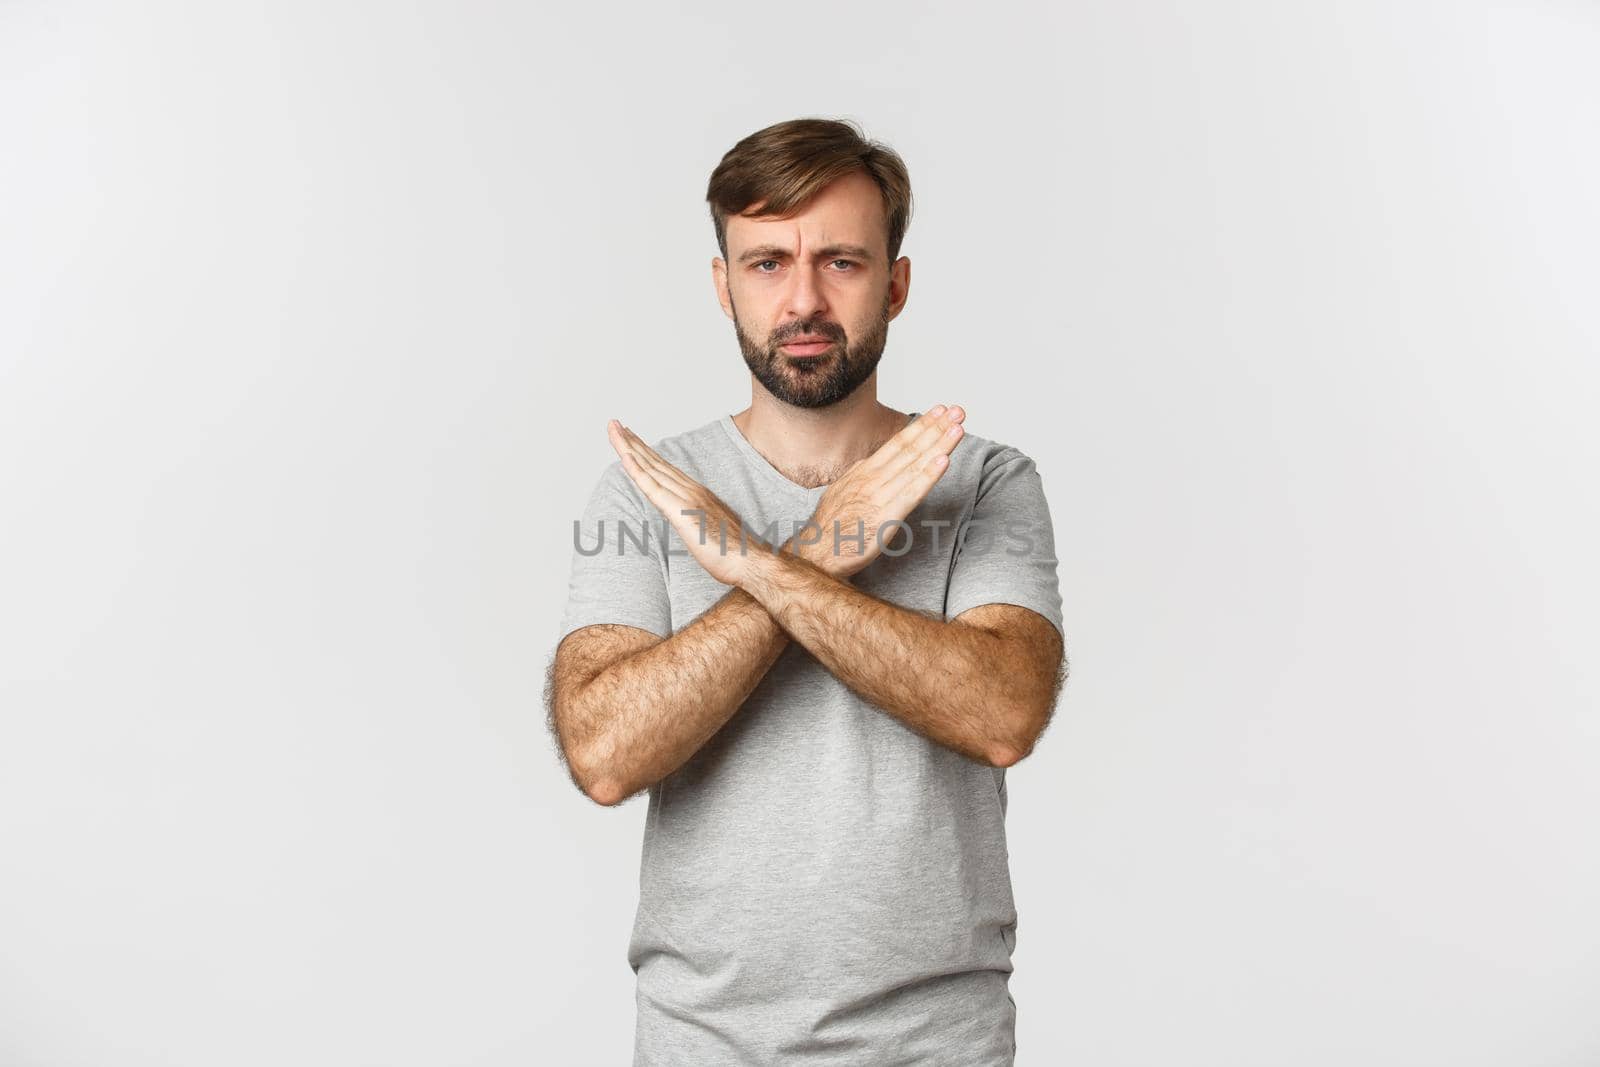 Disappointed man with beard, showing cross gesture and frowning, telling to stop, prohibit something bad, standing over white background.